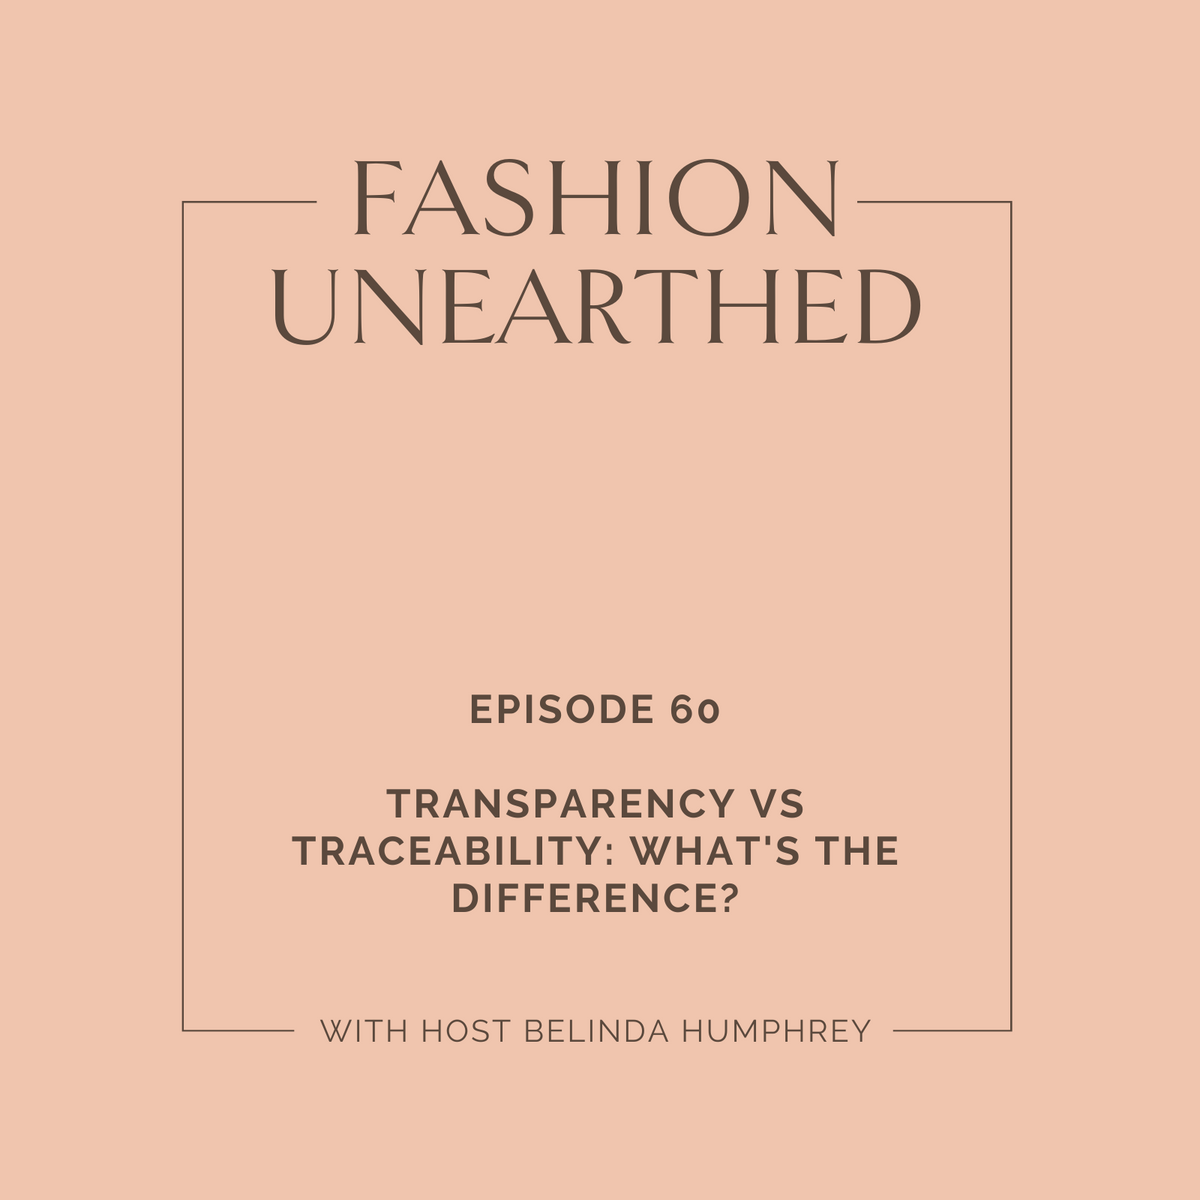 EPISODE 60: Transparency Vs Traceability: What's the difference?